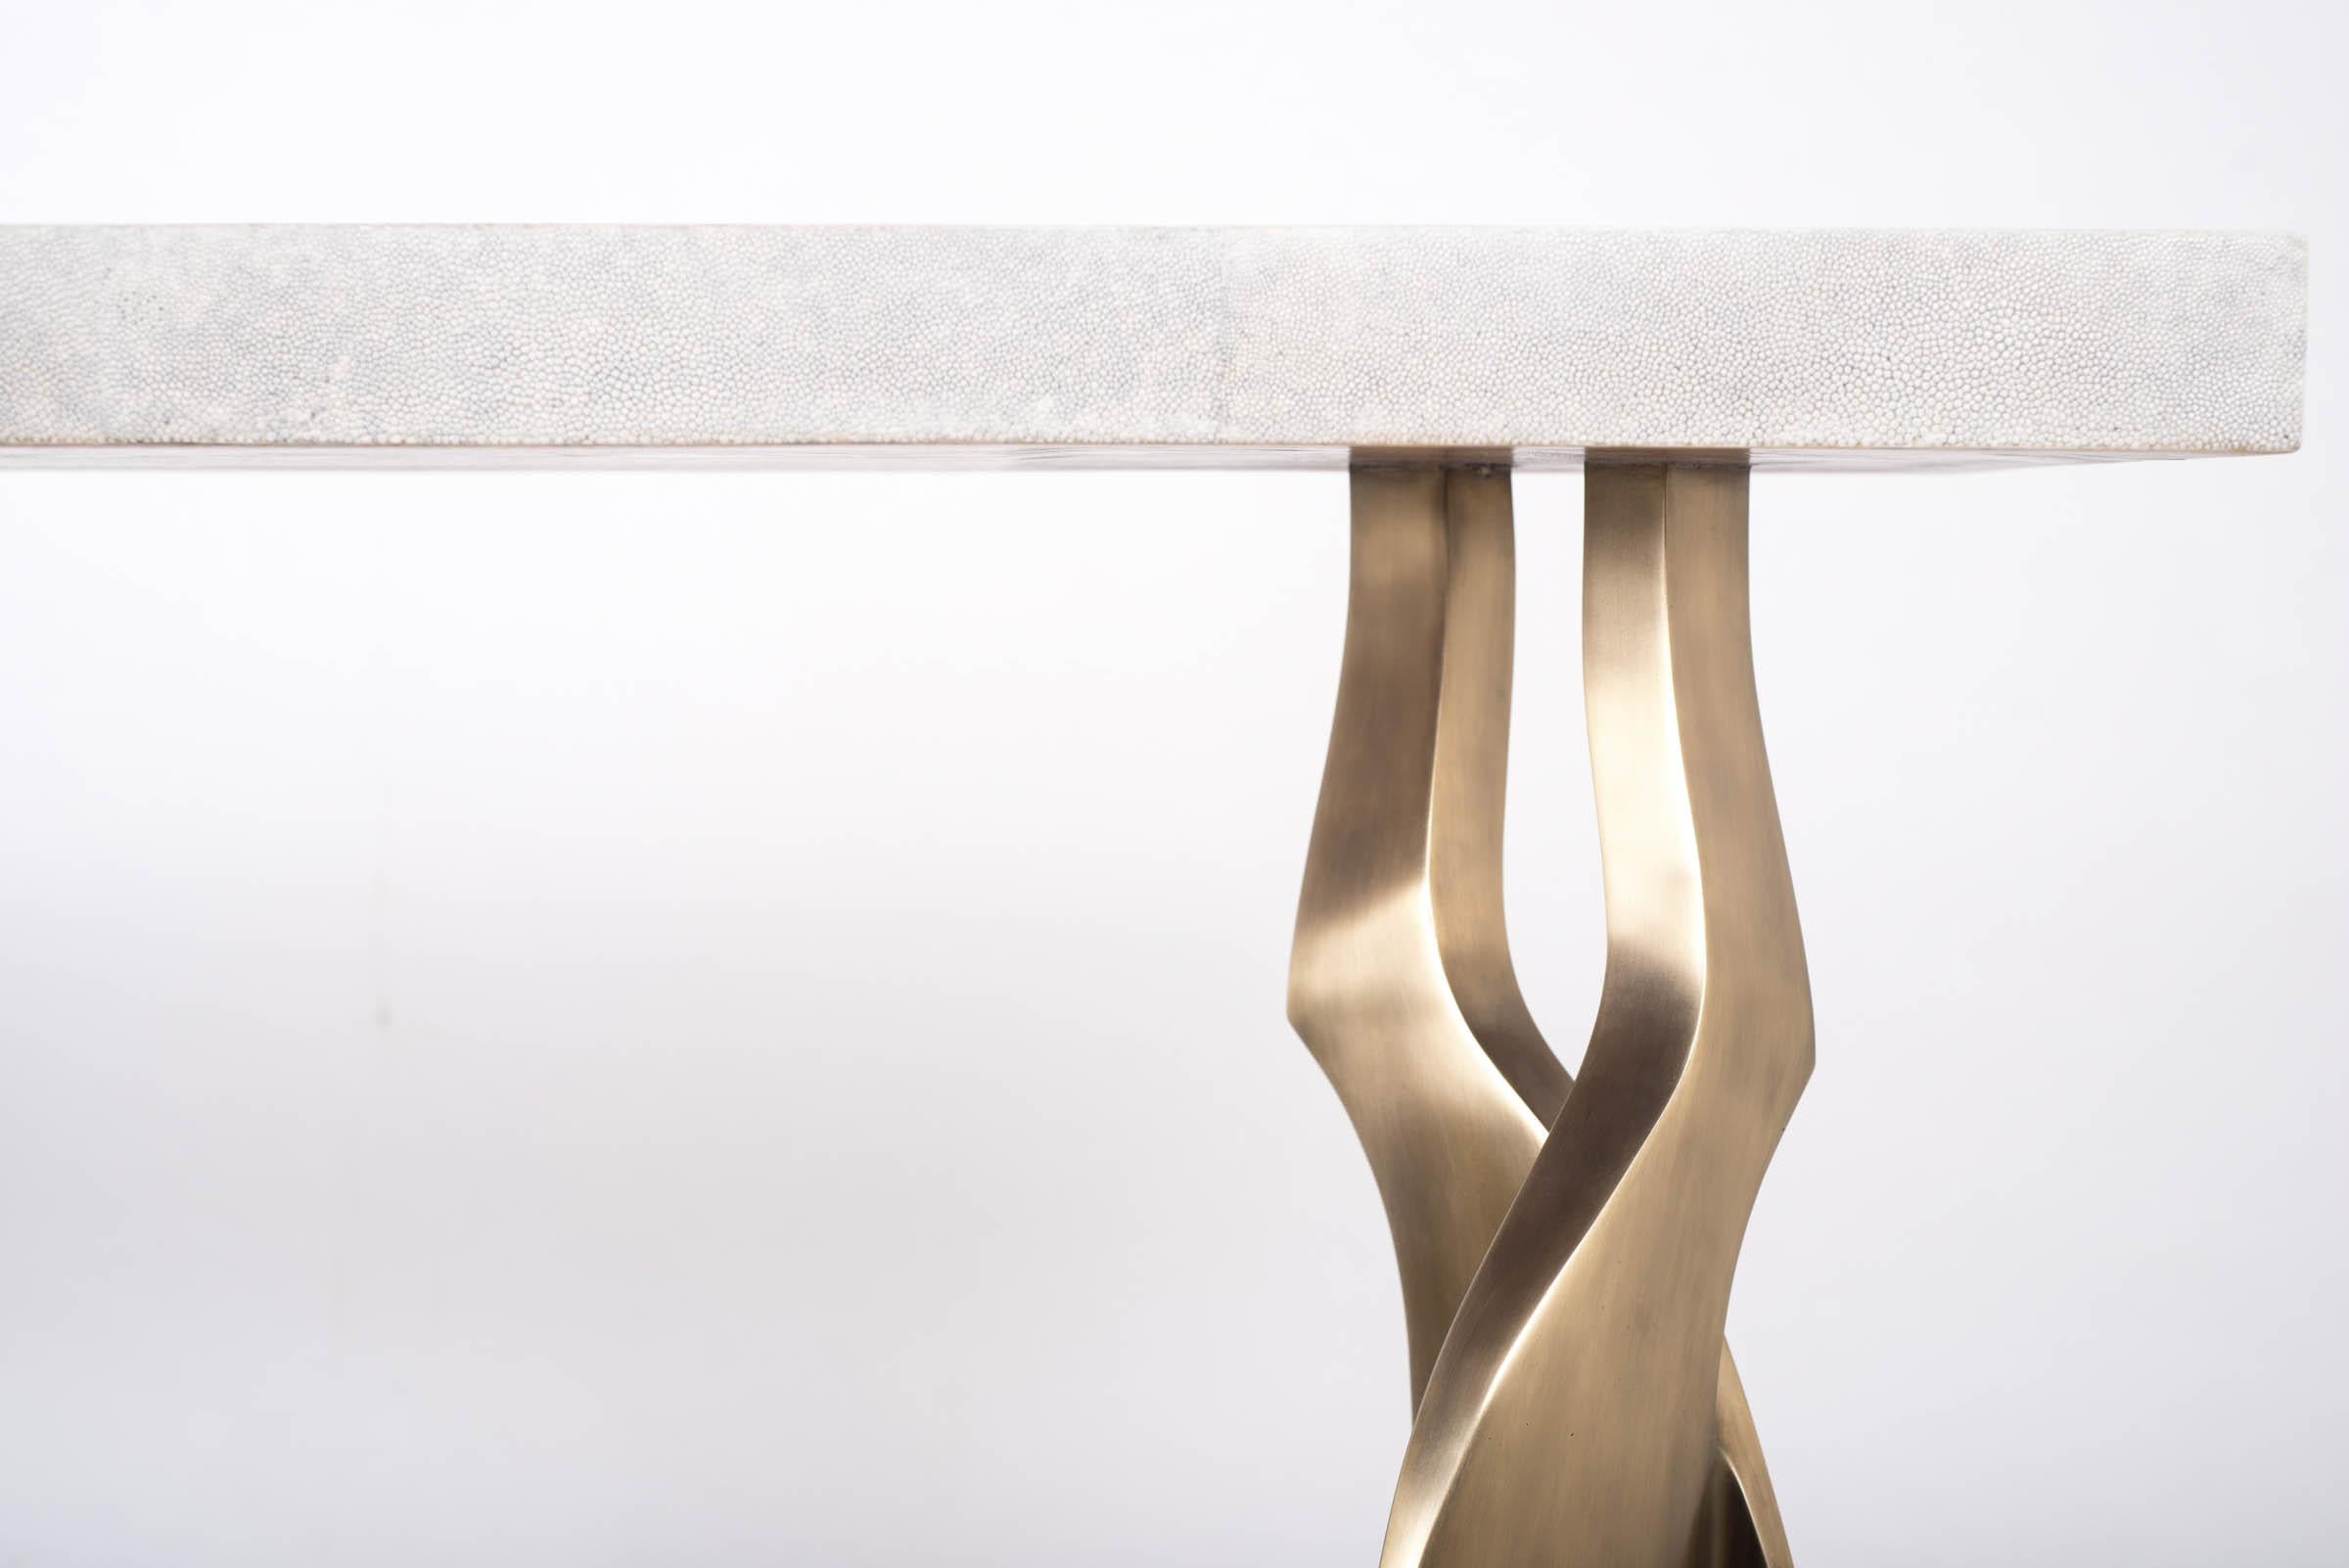 The Chital console table is both dramatic and organic it’s unique design. The cream shagreen inlaid top sits on a pair of ethereal & sculptural bronze-patina brass legs. This piece is designed by Kifu Augousti the daughter of Ria and Yiouri